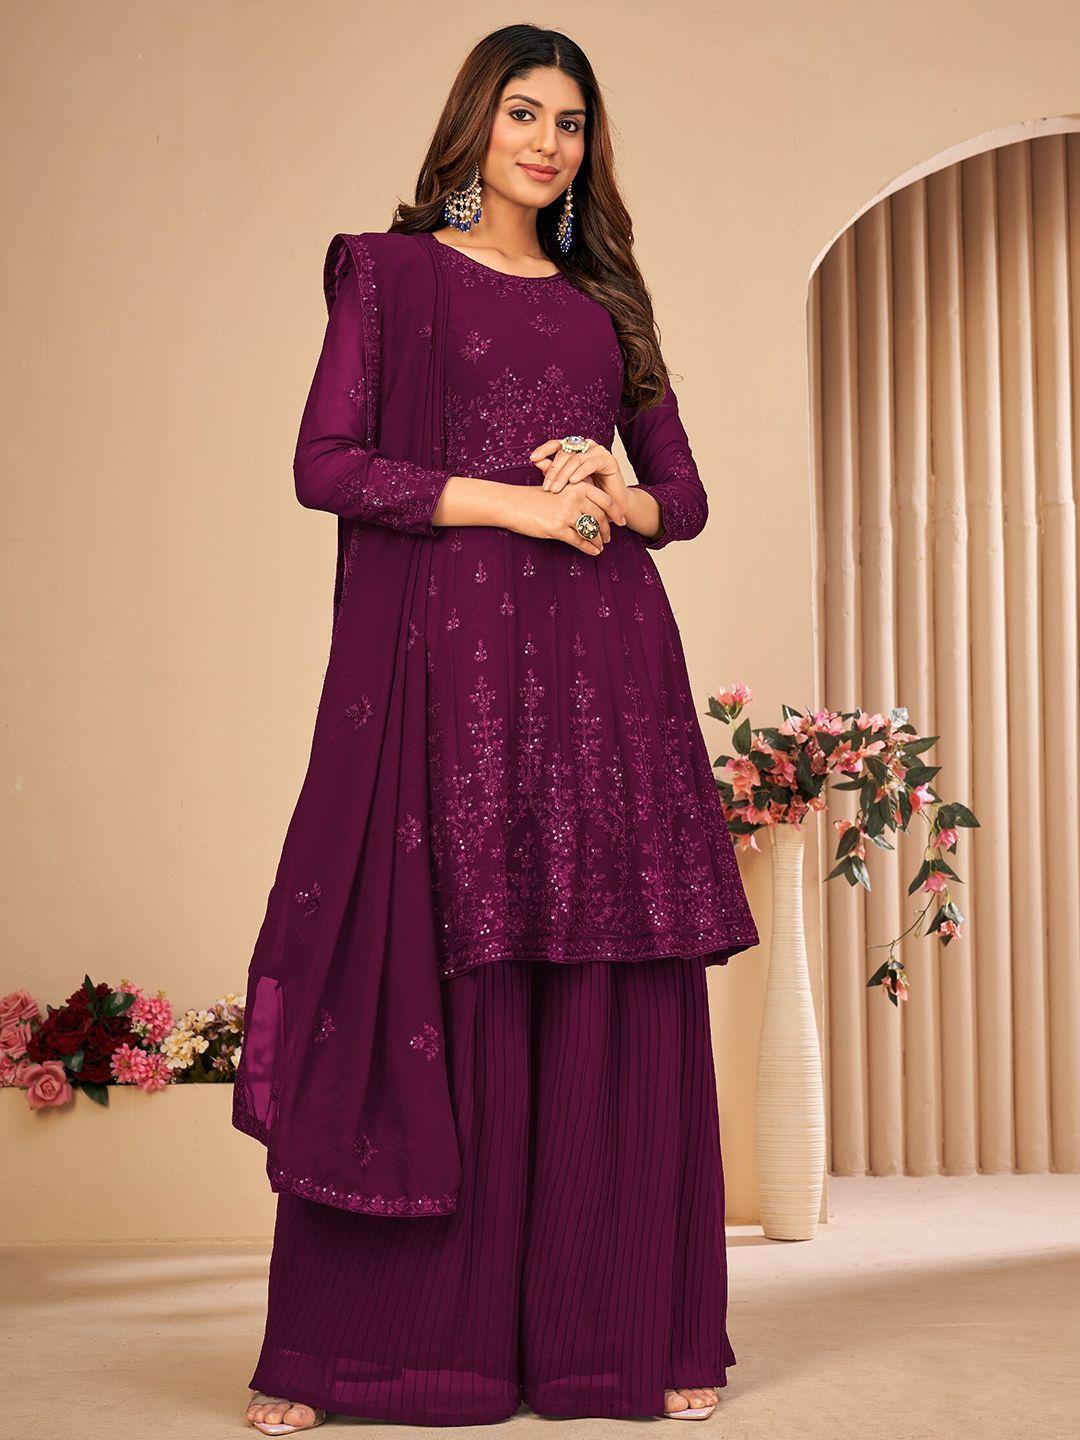 divine international trading co purple embroidered unstitched dress material